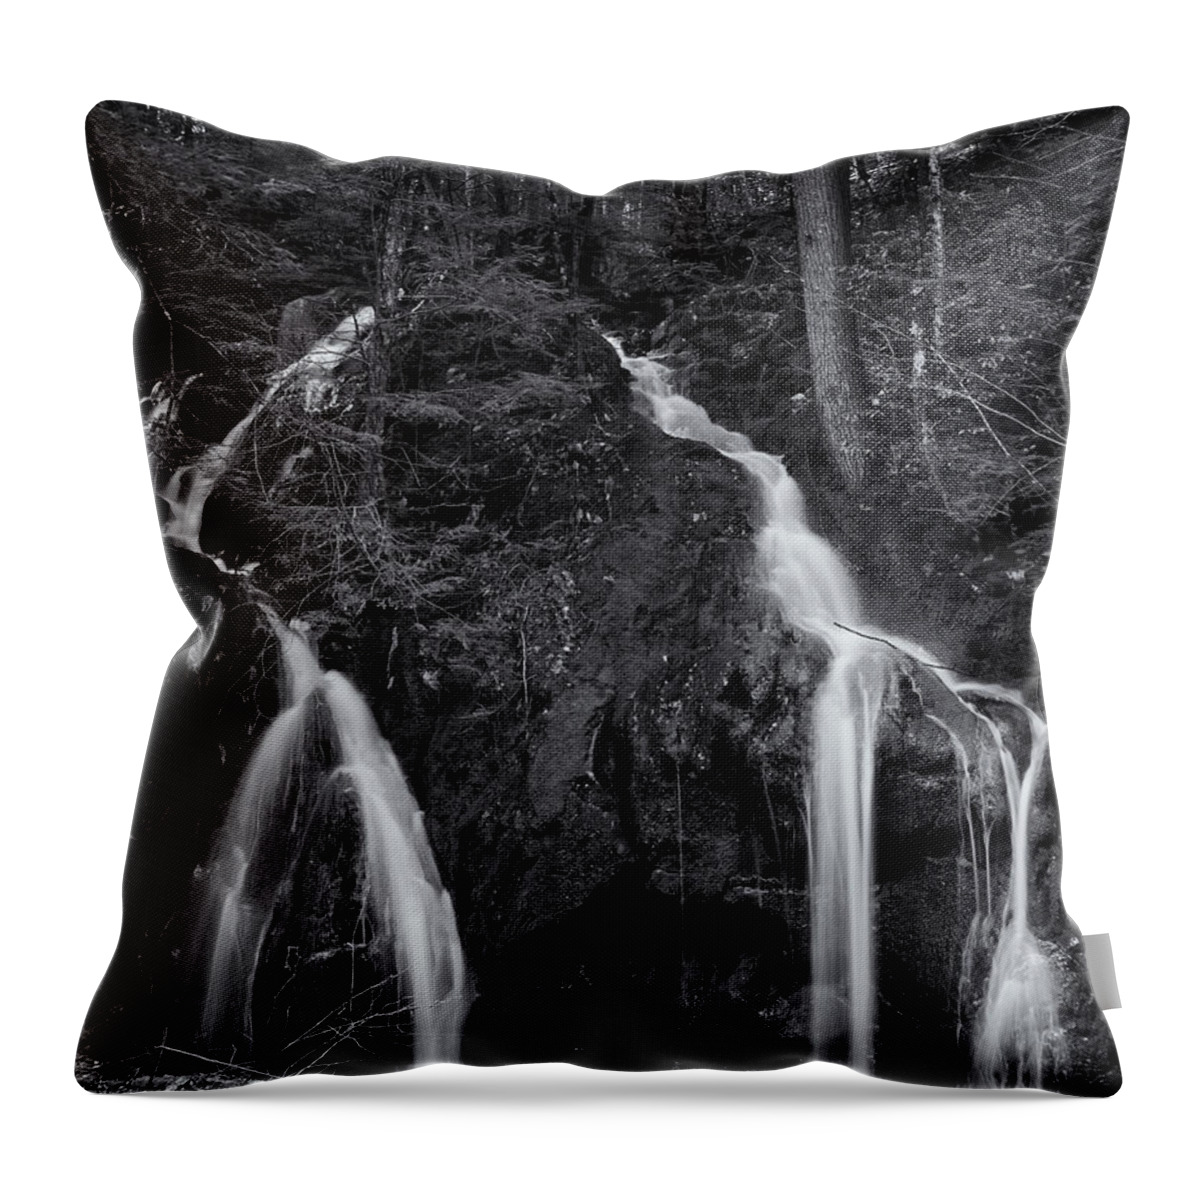 Gulf Road Waterfalls. Chesterfield New Hampshire Throw Pillow featuring the photograph Gulf Road Waterfall by Tom Singleton